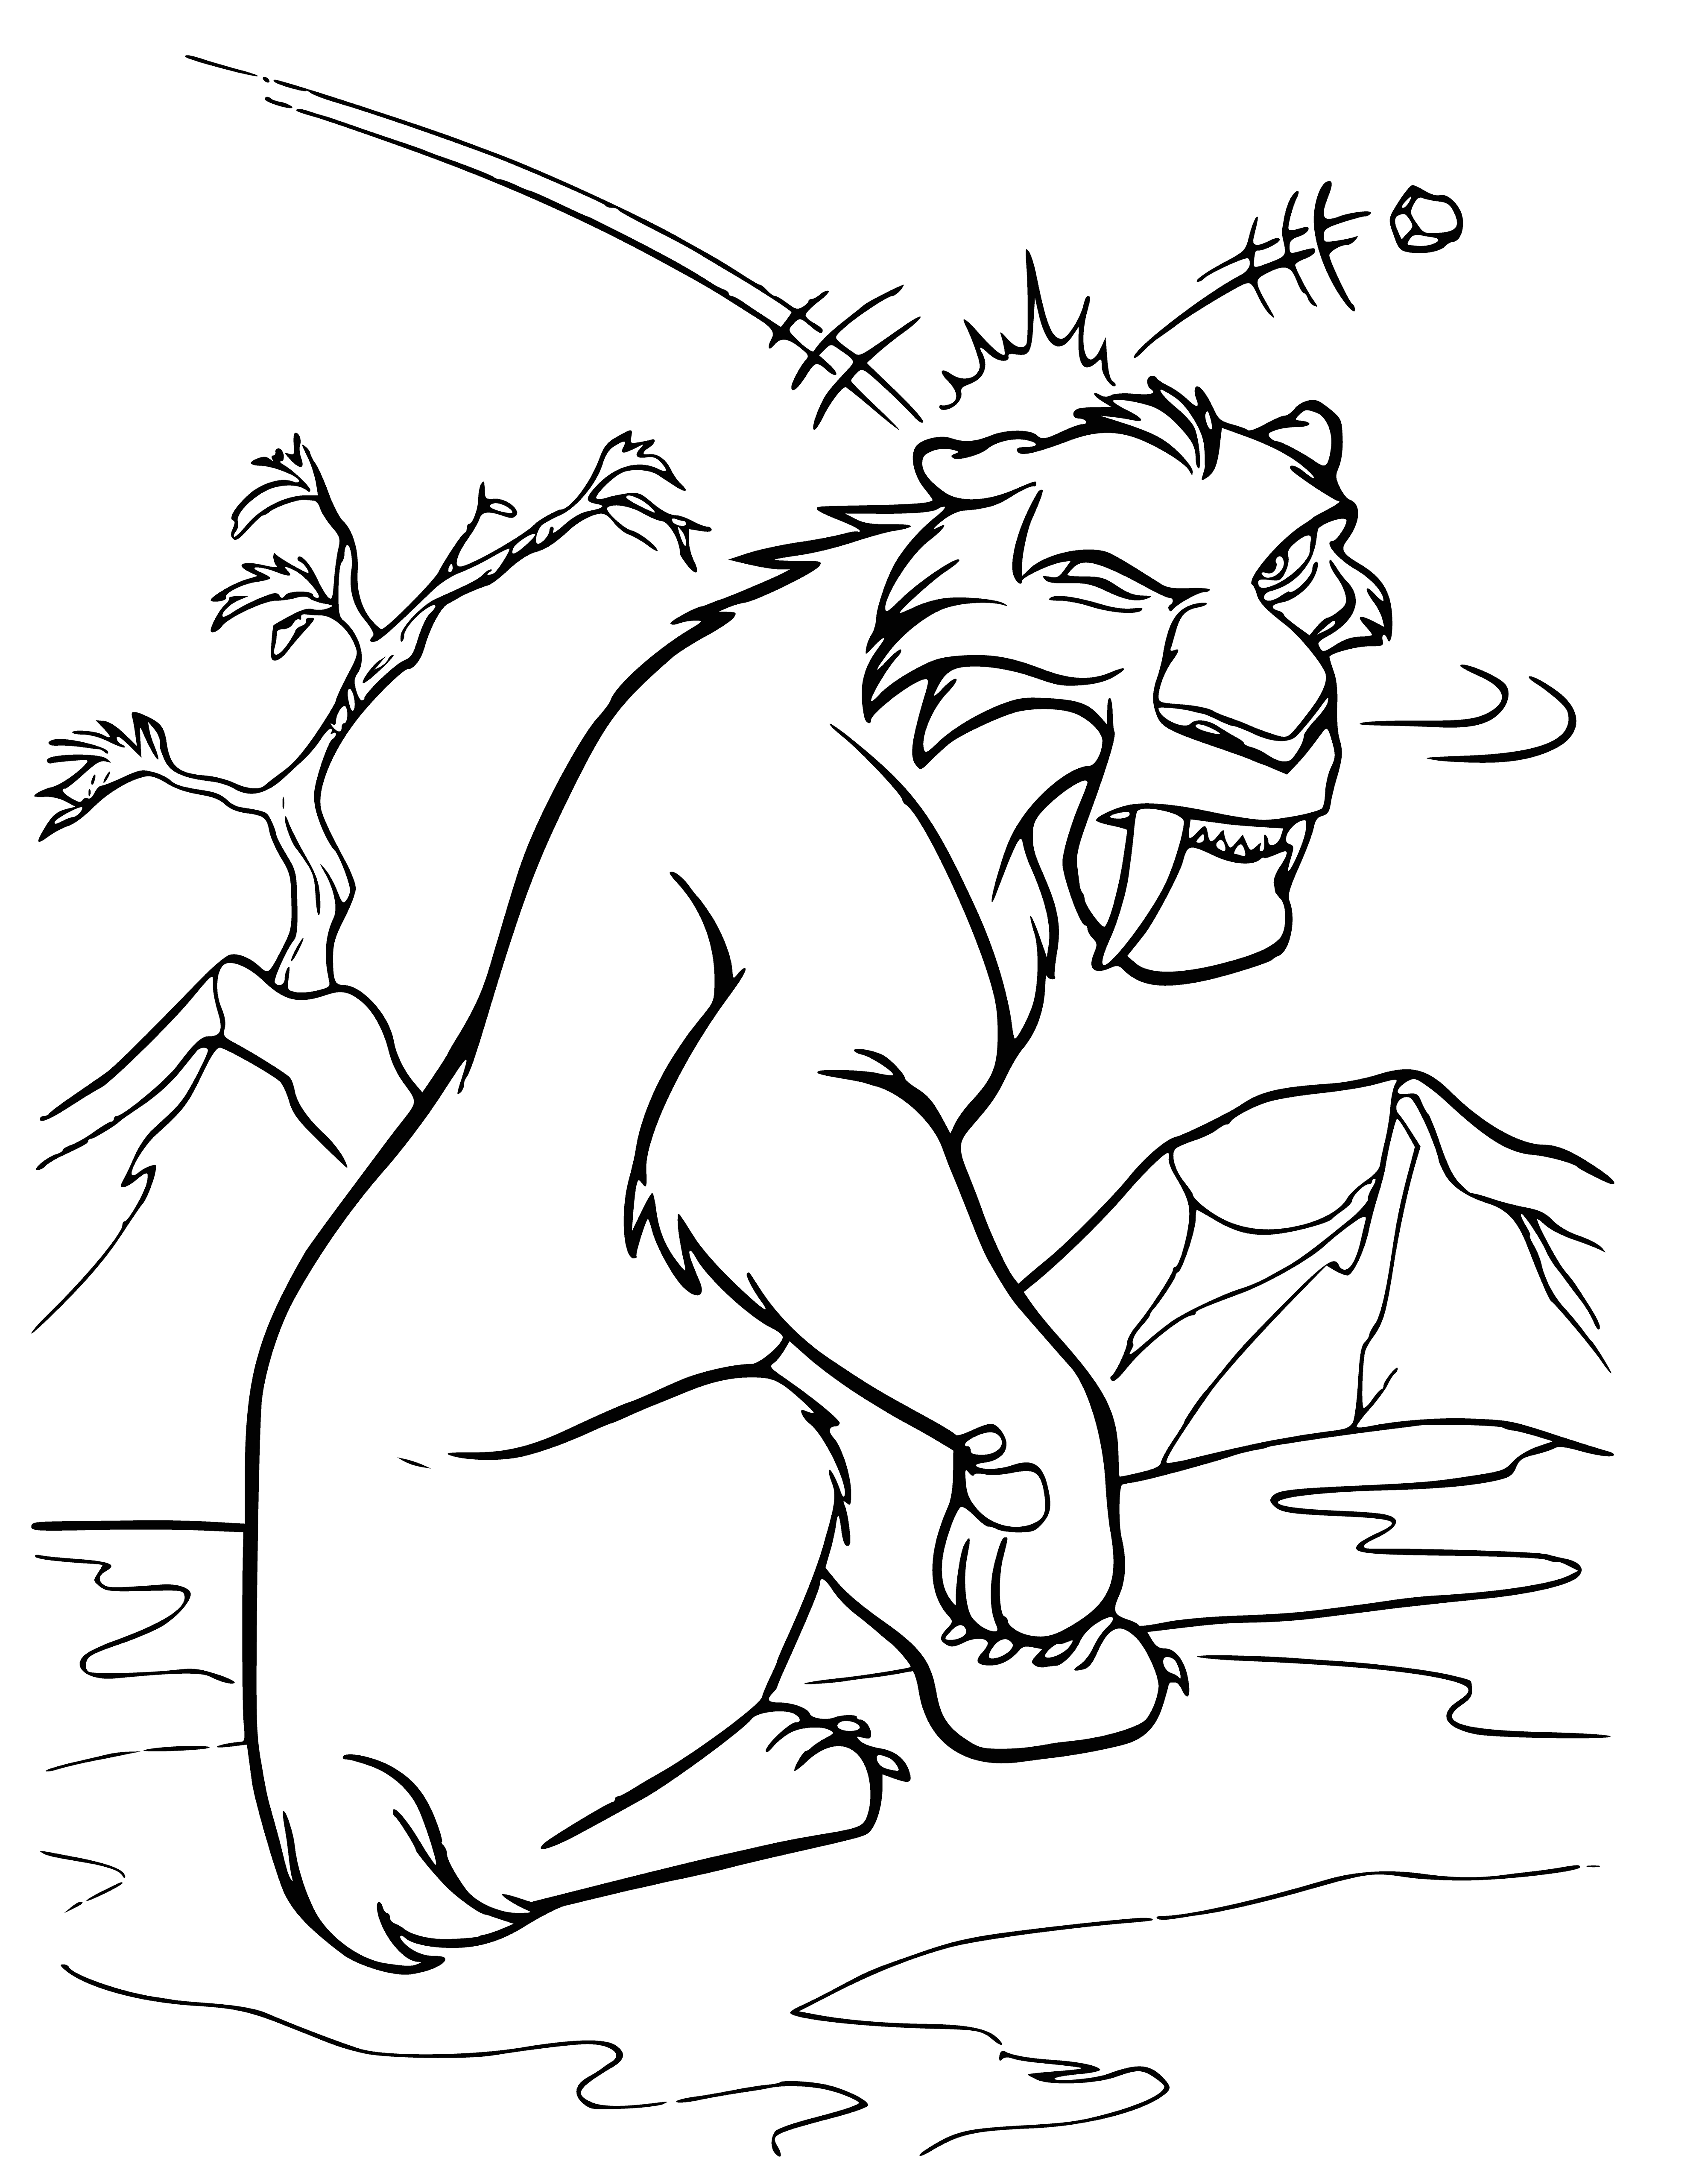 coloring page: Diego, a saber-toothed tiger from the Ice Age with large, sharp teeth, light brown fur & greenish-blue eyes, kneels down ready to pounce.